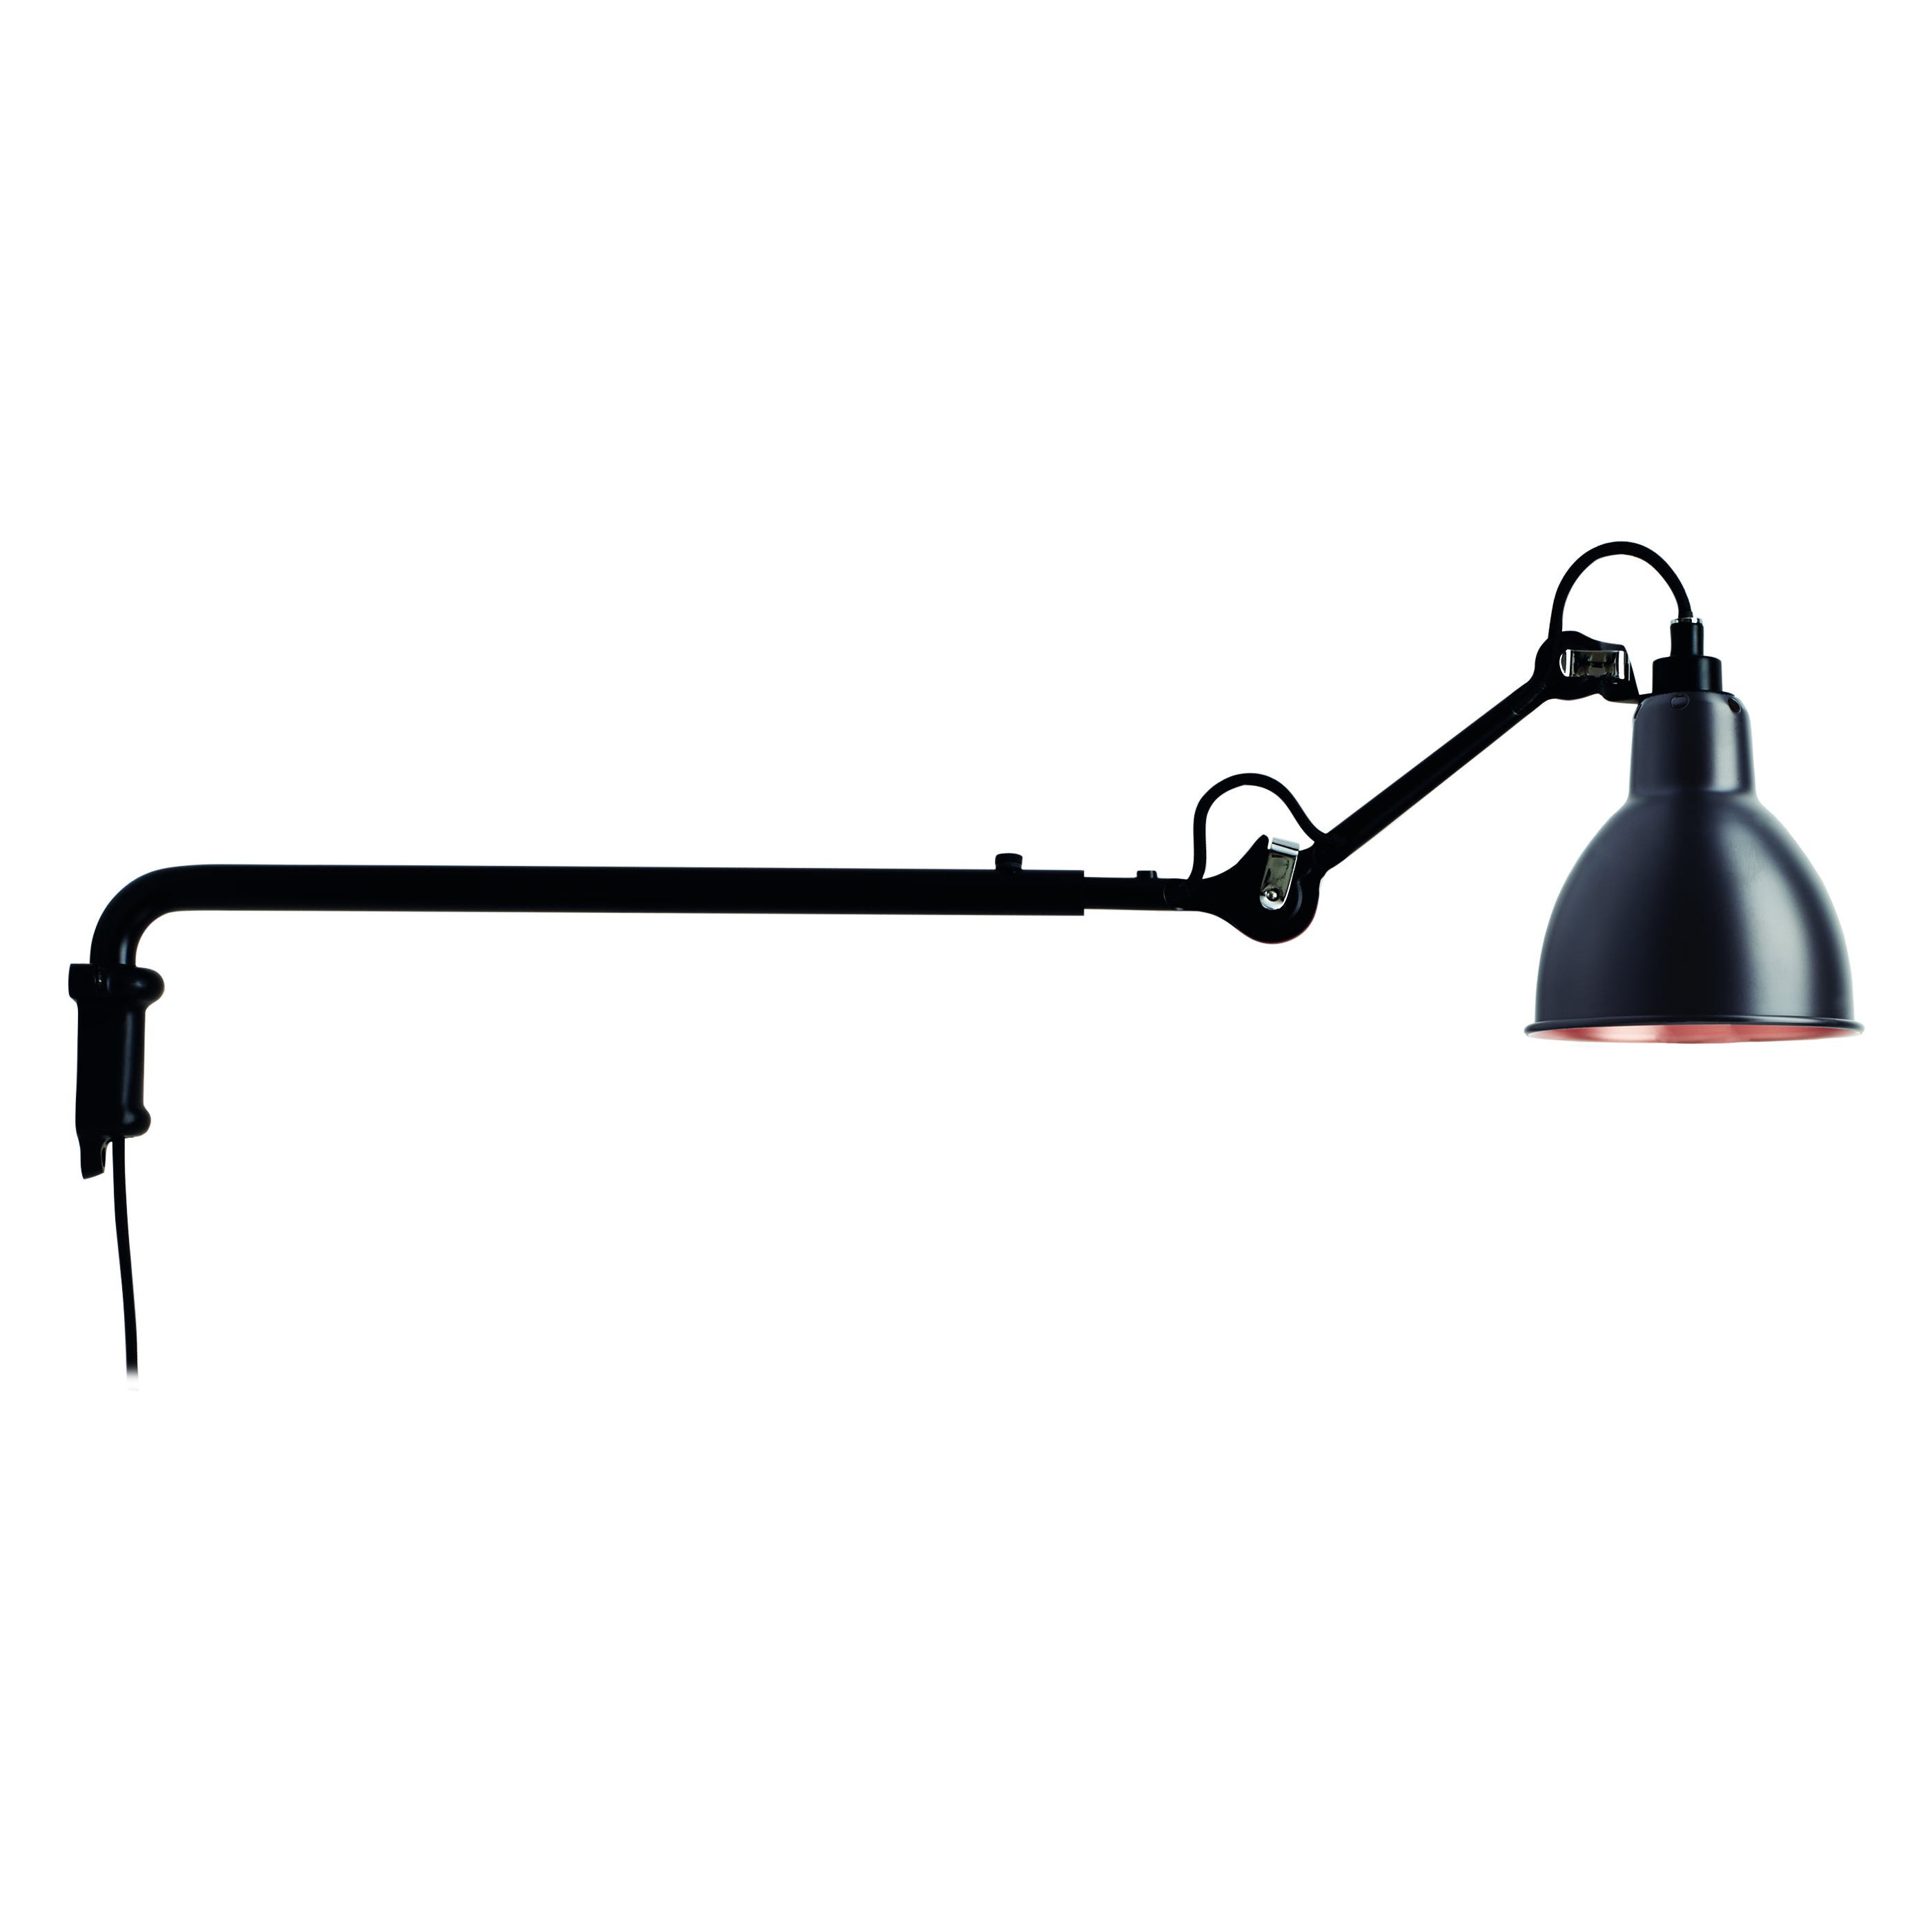 DCW Editions La Lampe Gras N°203 Wall Lamp in Black Steel Arm and Copper Shade For Sale